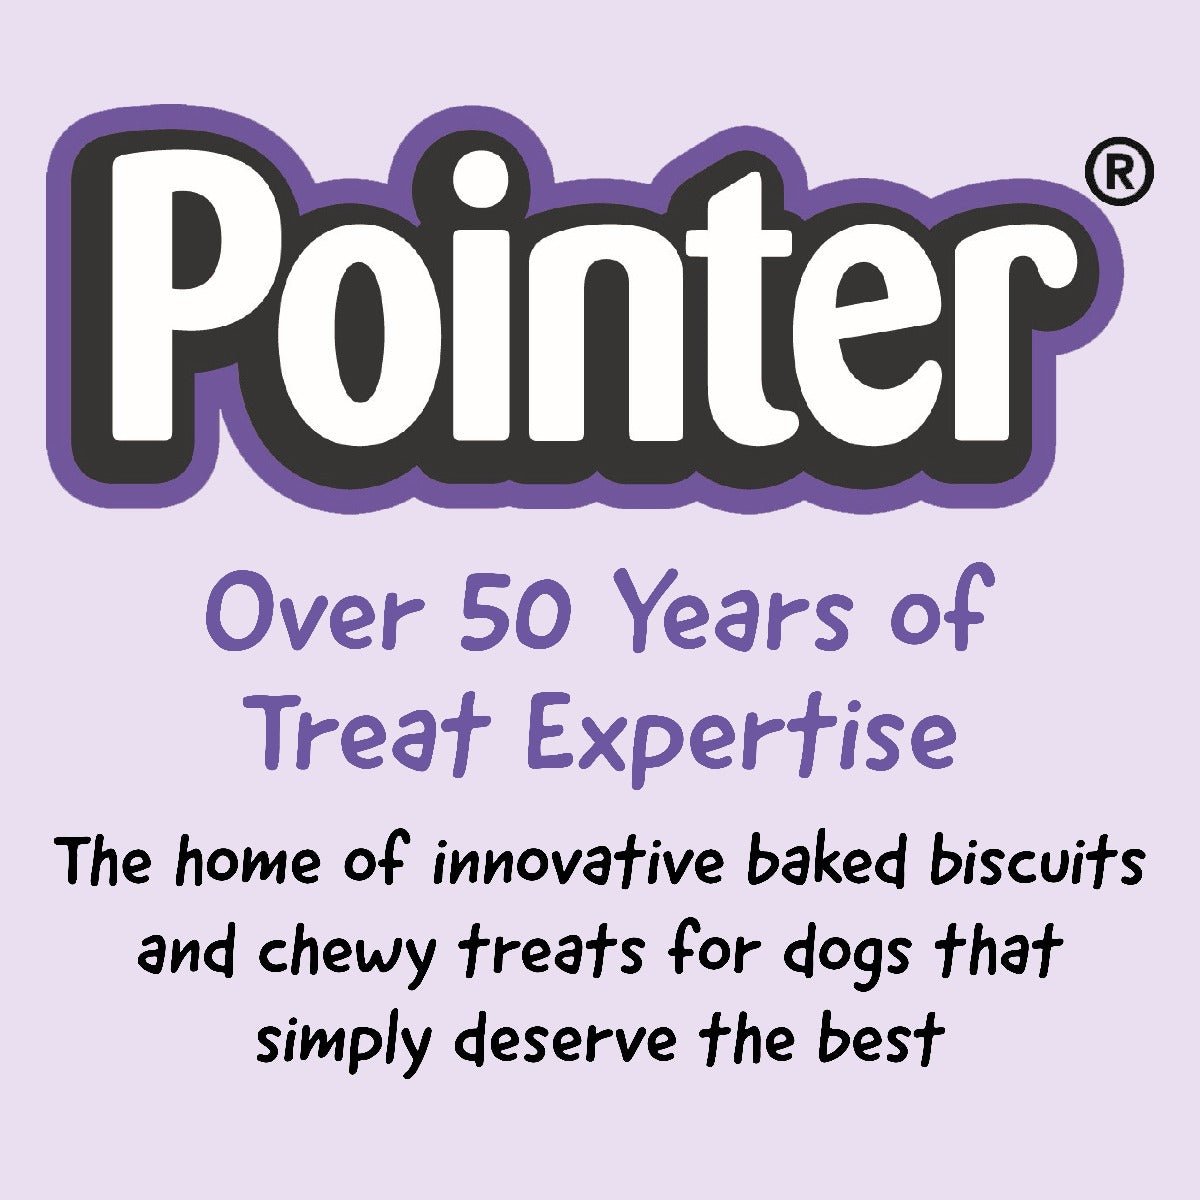 Pointer Wheat Free Peanut Butter Paws 10 kg, Pointer,